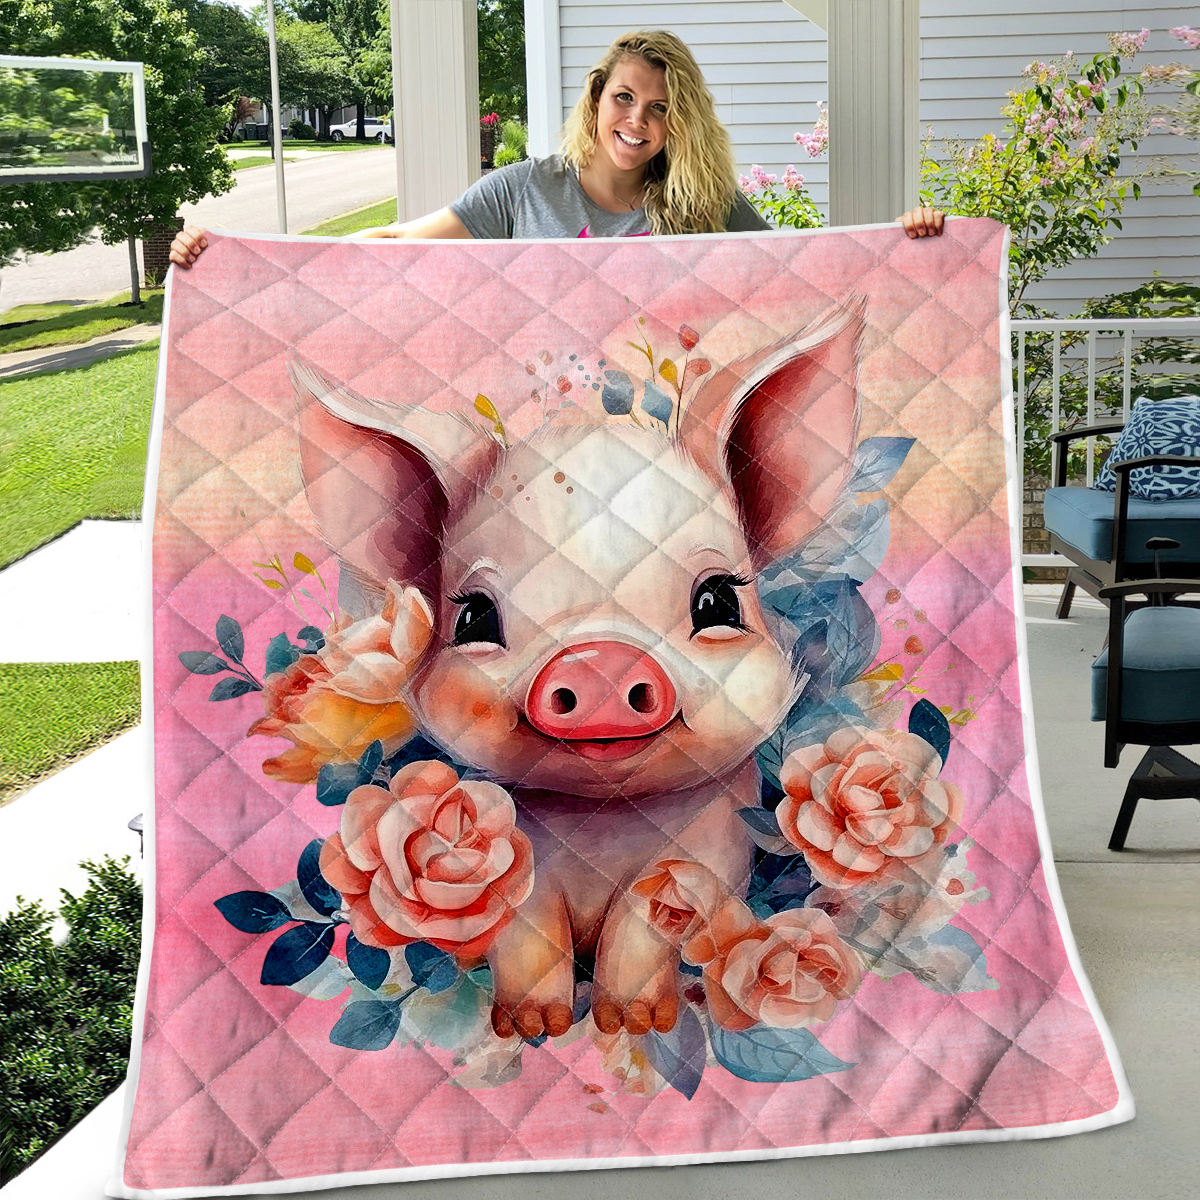 Pig With Flowers quilt